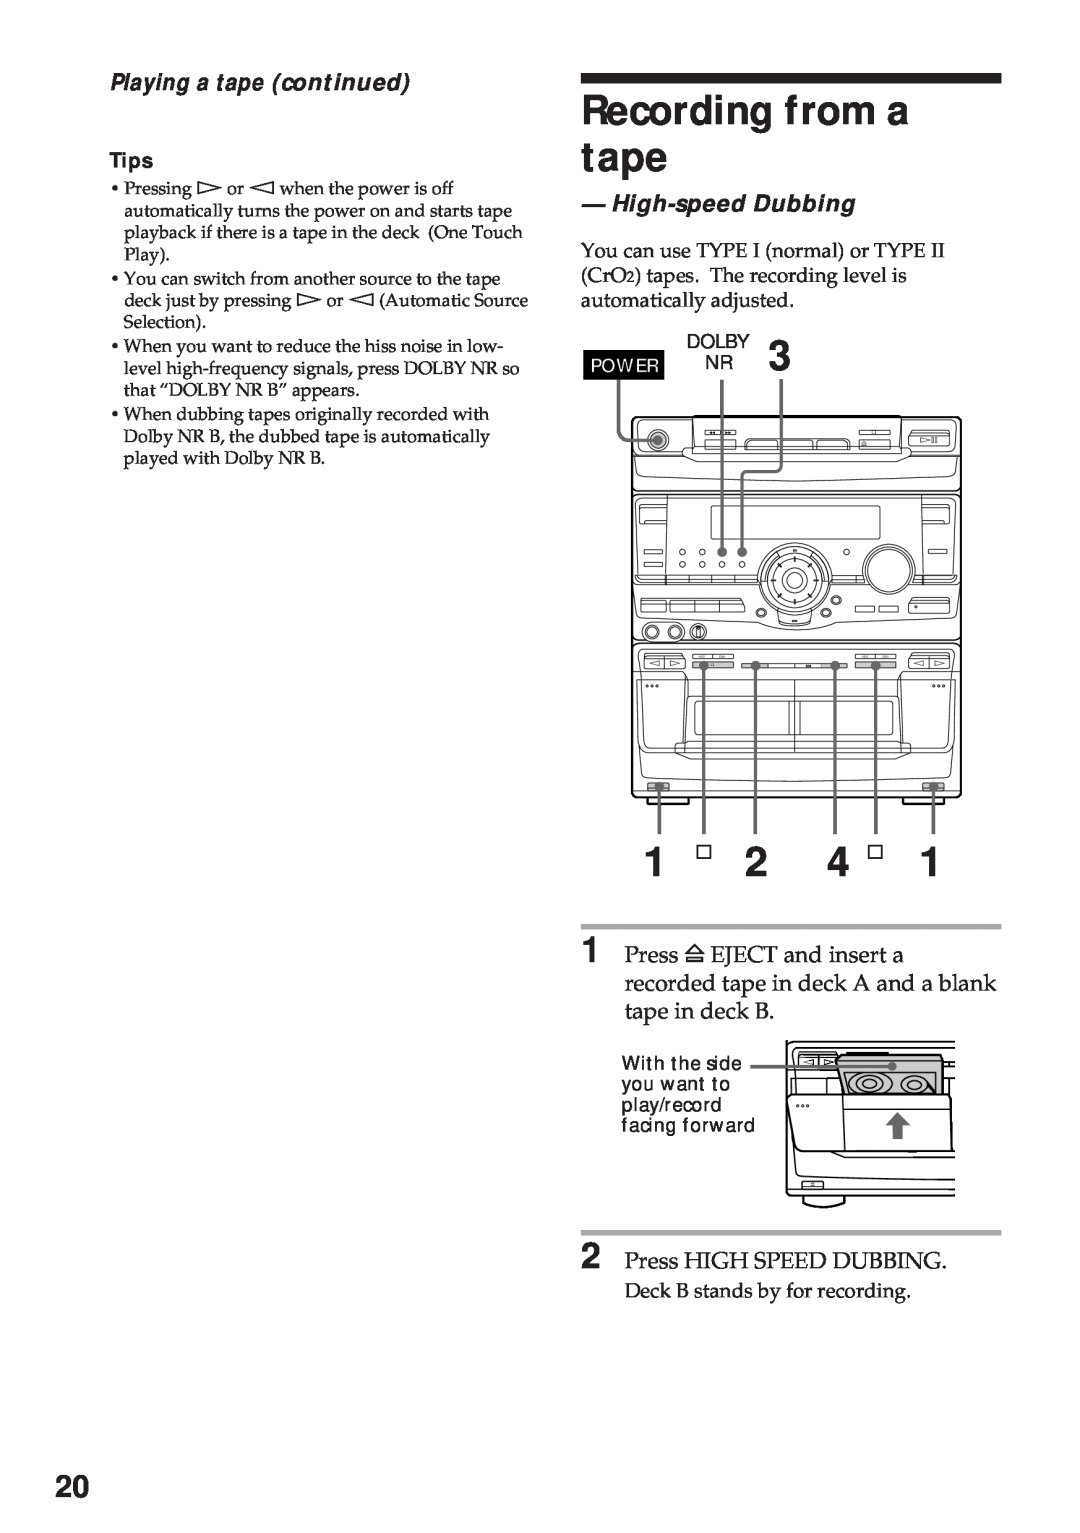 Sony MHC-RX100AV operating instructions Recording from a tape, 1 ¹ 2 4 ¹, Playing a tape continued, High-speedDubbing 